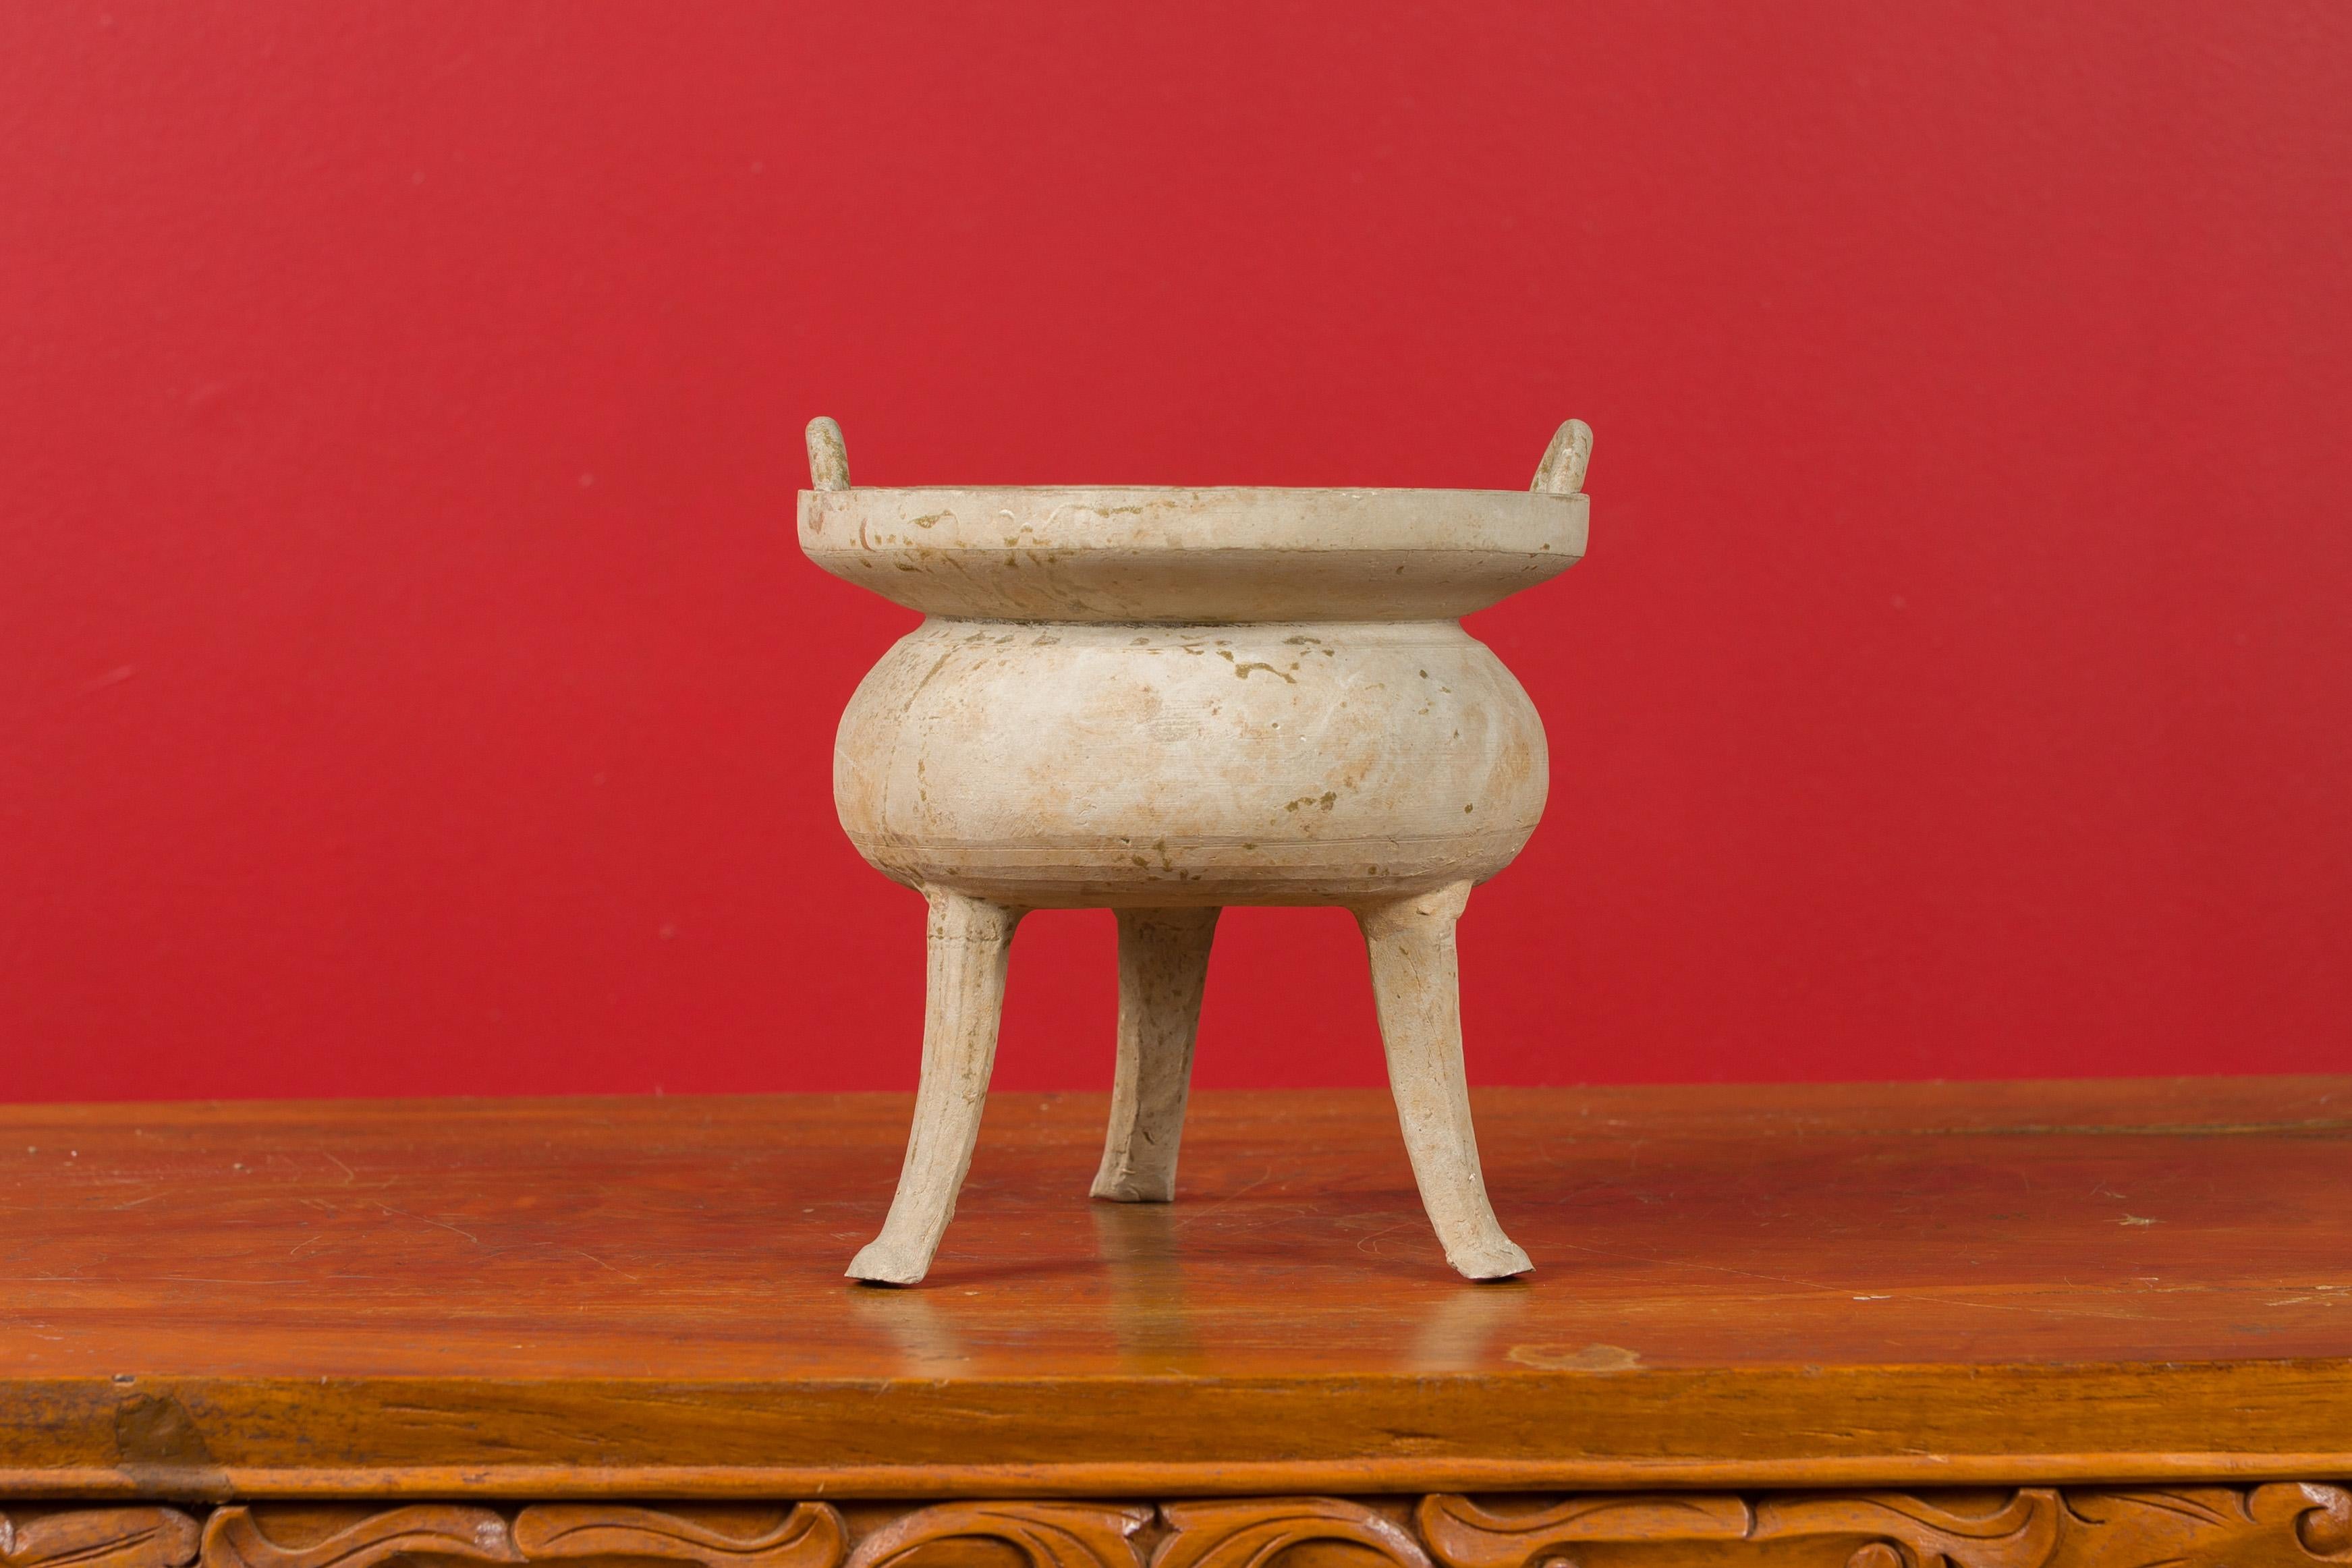 A Chinese Han dynasty period incense burner circa 202 BC-200 AD, with petite lateral handles and tripod base. Created in China during the prestigious Han dynasty, this ancient incense burner features a circular shape topped with petite handles, the